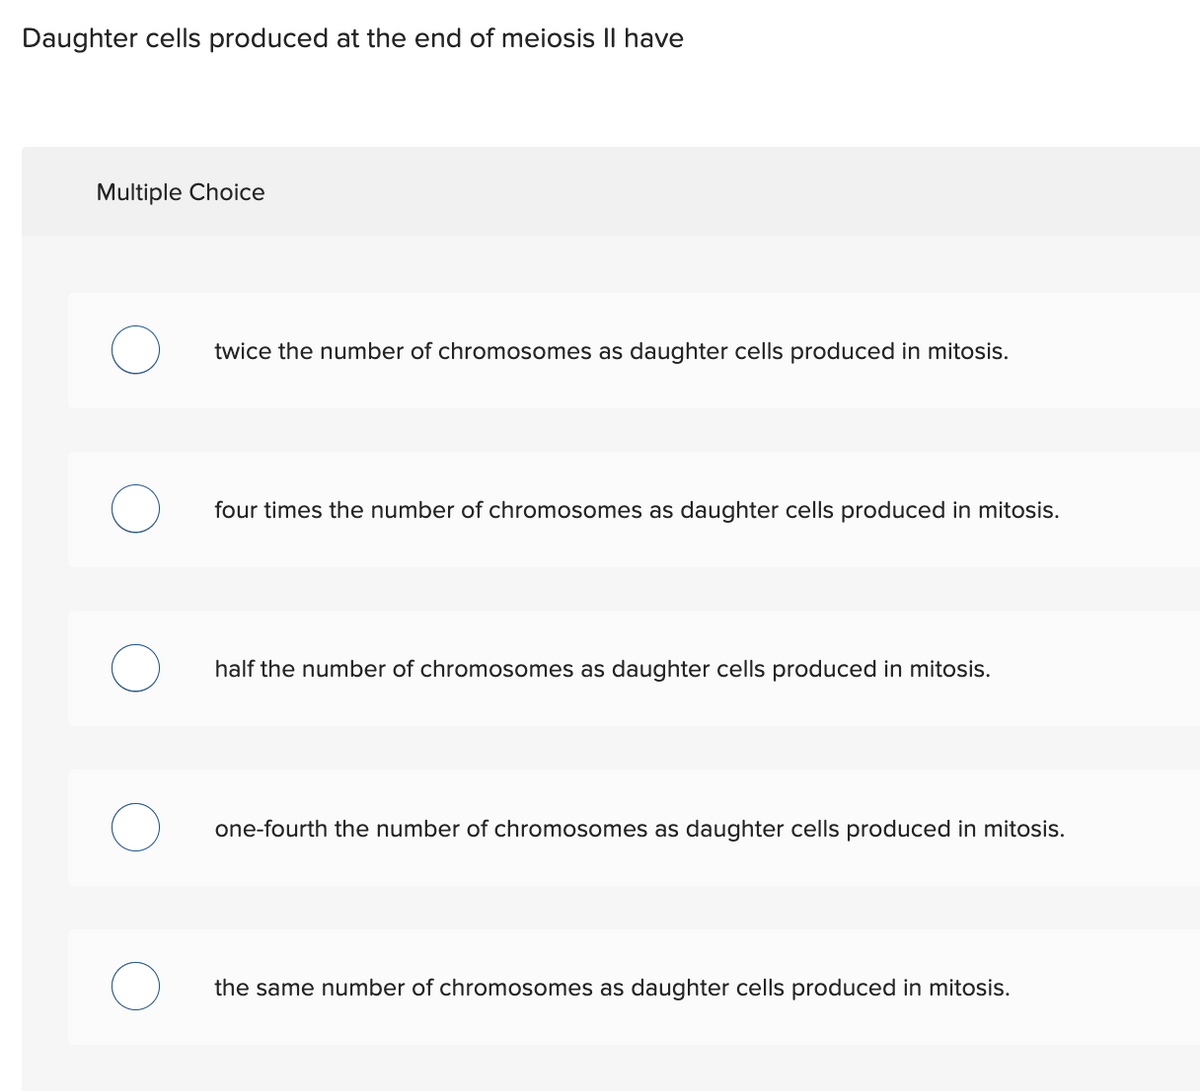 Daughter cells produced at the end of meiosis II have
Multiple Choice
twice the number of chromosomes as daughter cells produced in mitosis.
four times the number of chromosomes as daughter cells produced in mitosis.
half the number of chromosomes as daughter cells produced in mitosis.
one-fourth the number of chromosomes as daughter cells produced in mitosis.
the same number of chromosomes as daughter cells produced in mitosis.